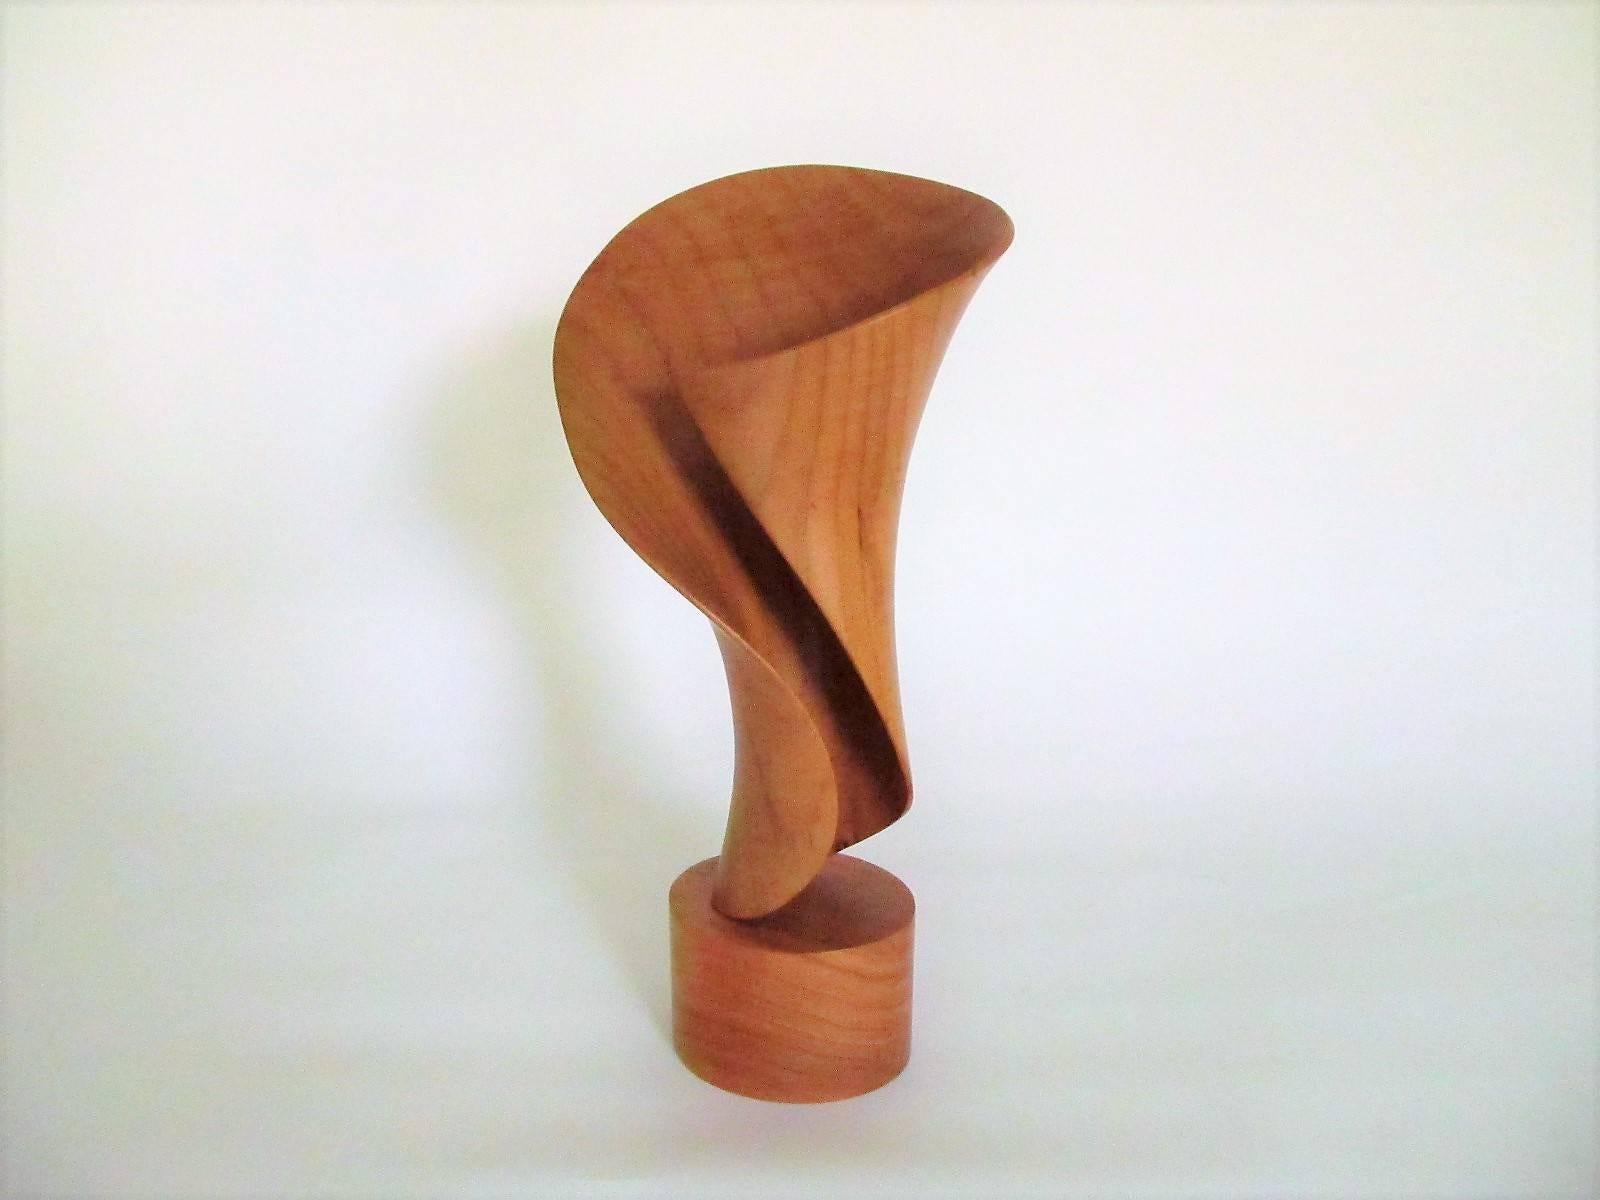 An organic and sensuously pleasing wood sculpture by California artist John McAbery, done in 1999. 

McAbery lives on a remote beach in Northern California in his hand made house and creates fantastic wood sculptures entirely by hand, using only